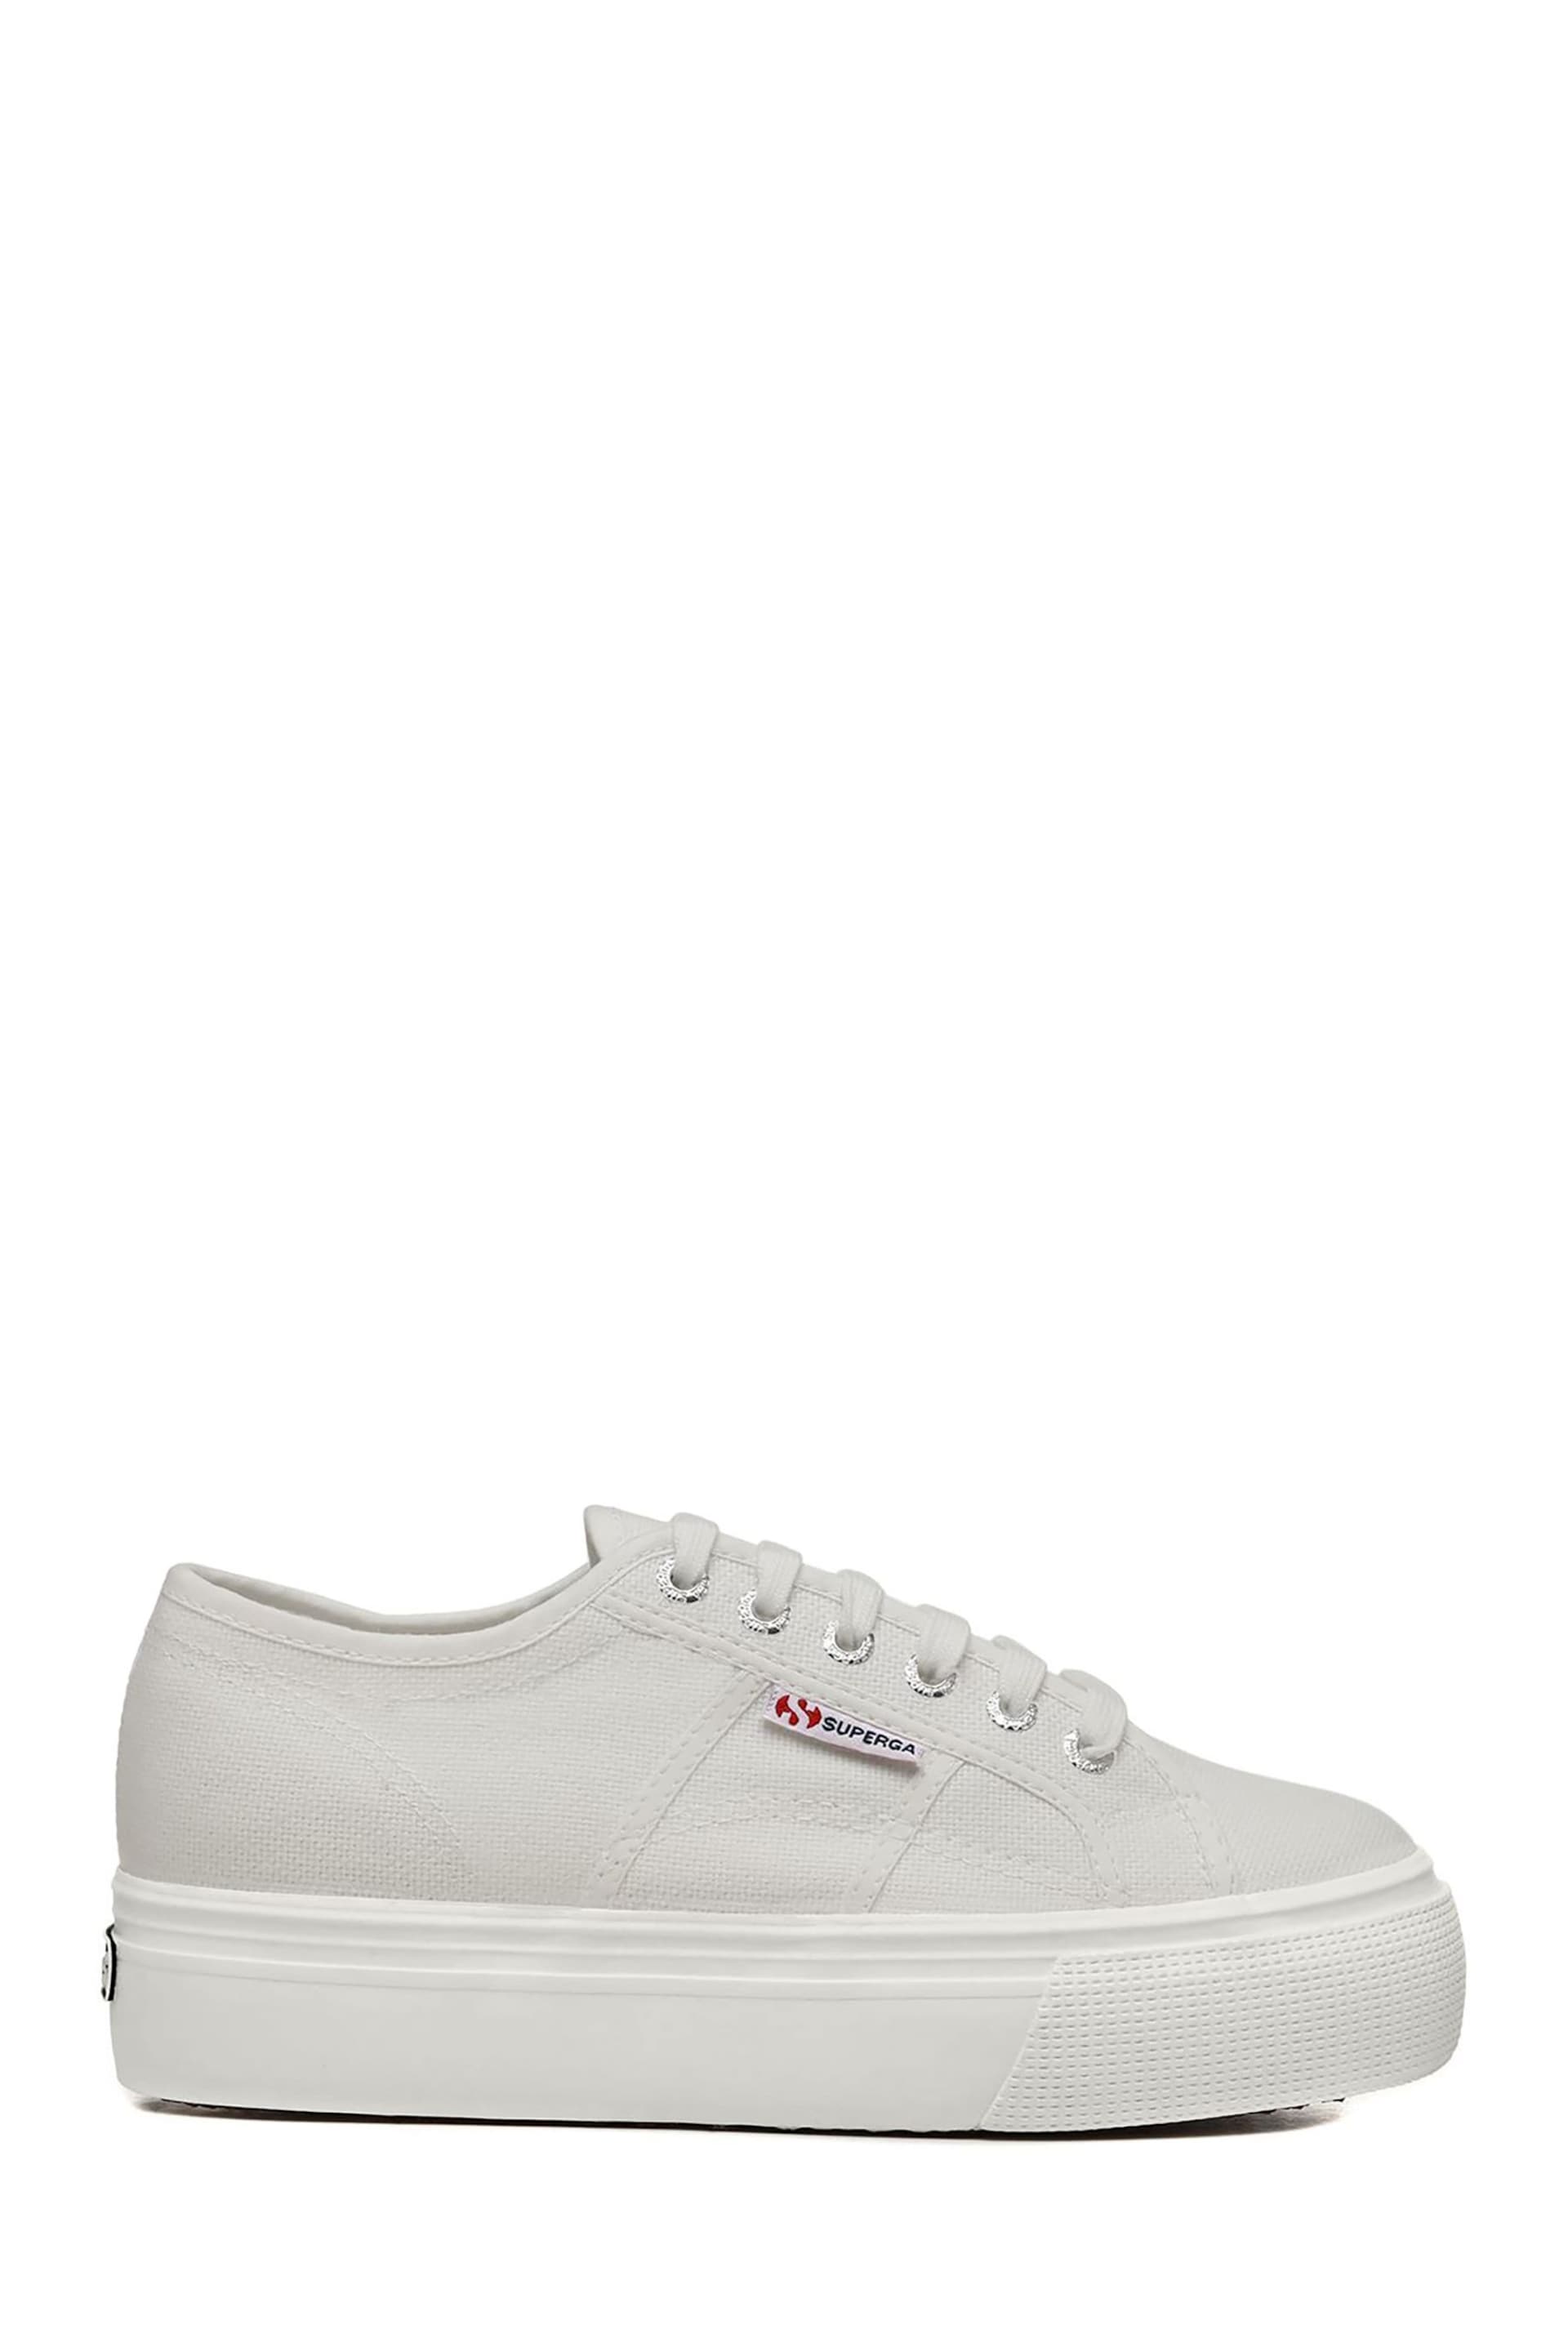 Superga Grey green 2790-Cotw Linea Up And Down Trainers - Image 1 of 5